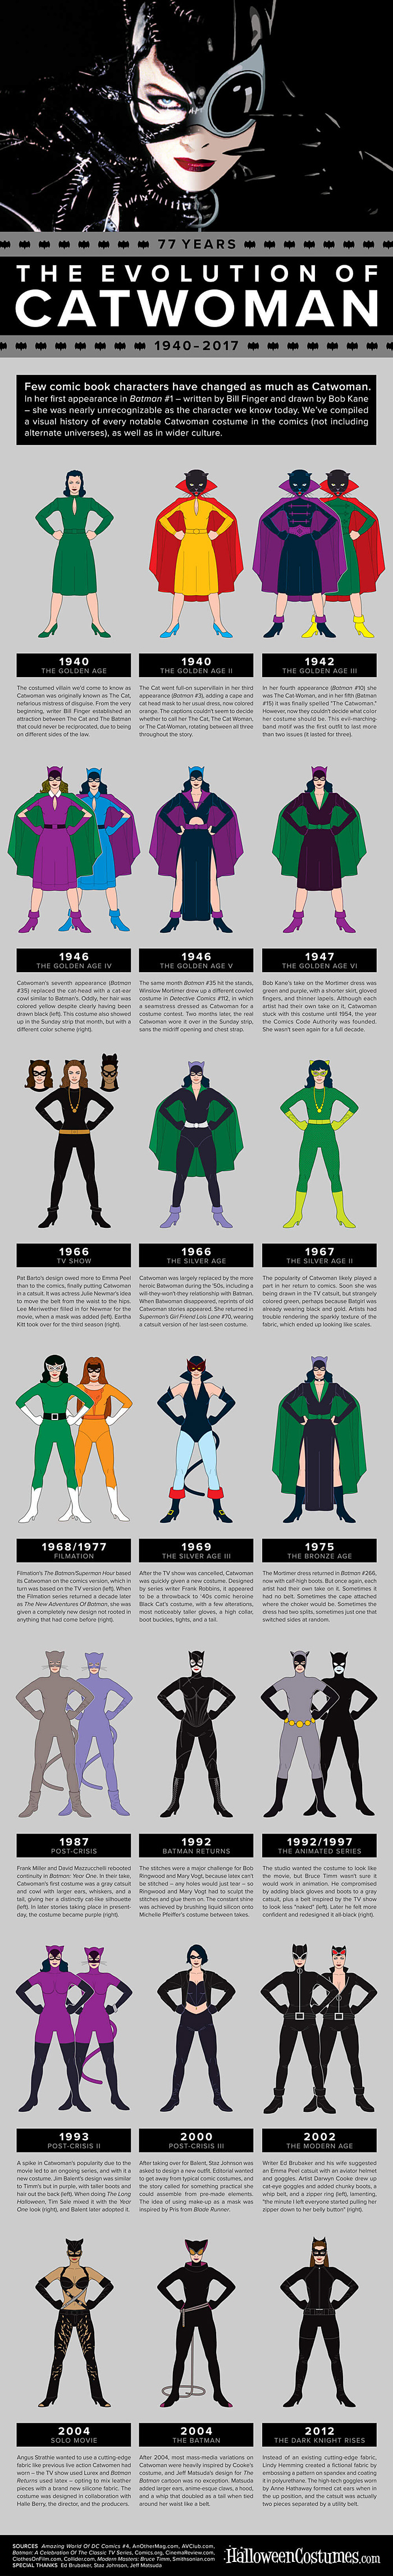 The Evolution of Catwoman